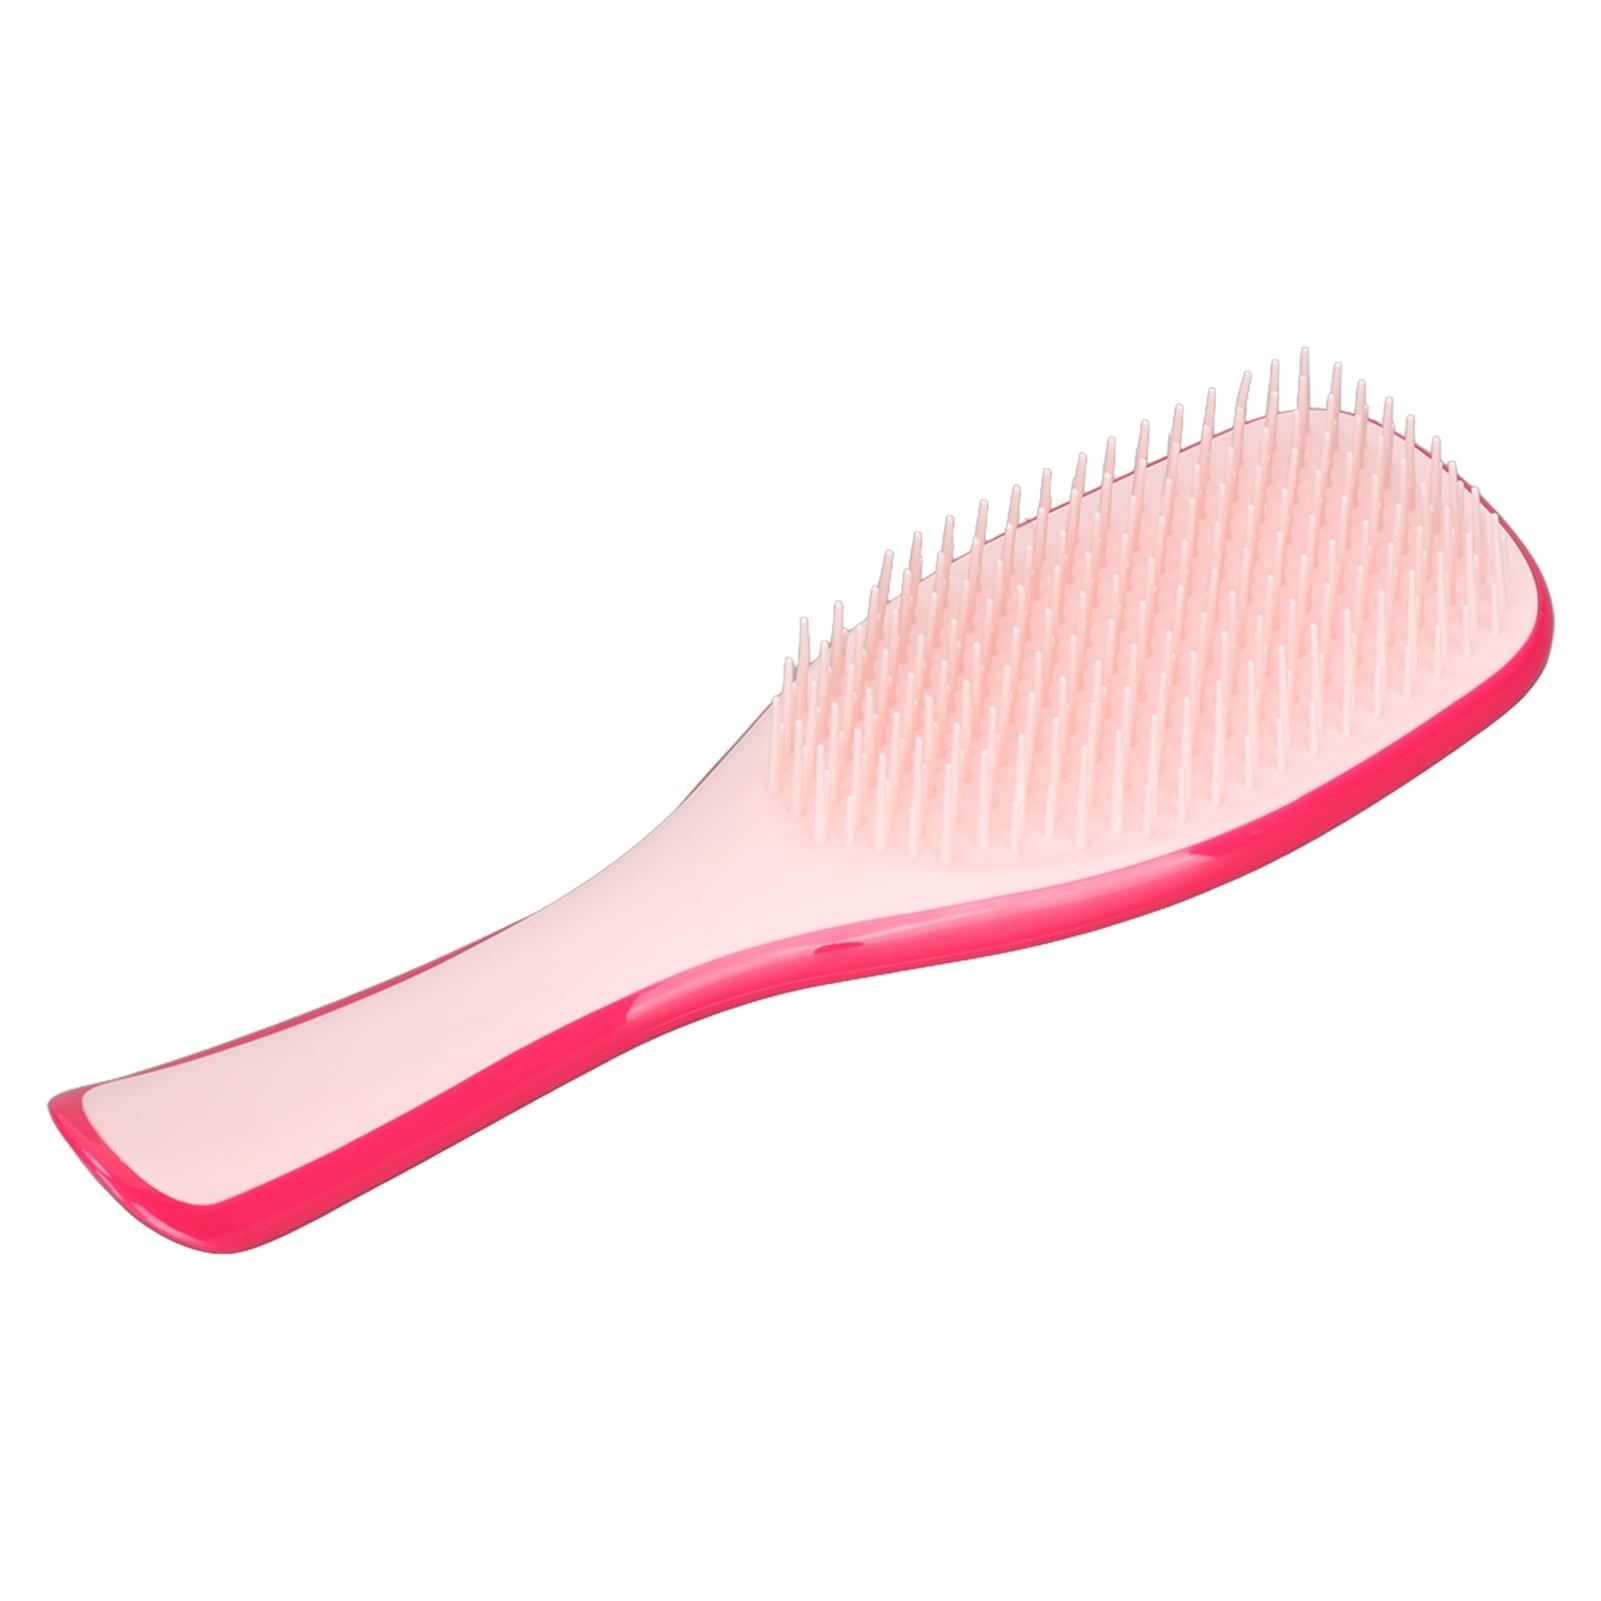 Paddle Brush Hairbrush For Women Curve Brush Hair Brushes Hole Design ABS  Material Lightweight Portable / Stable Handle Hairbrush  For BarbershopsRose Red Pink 